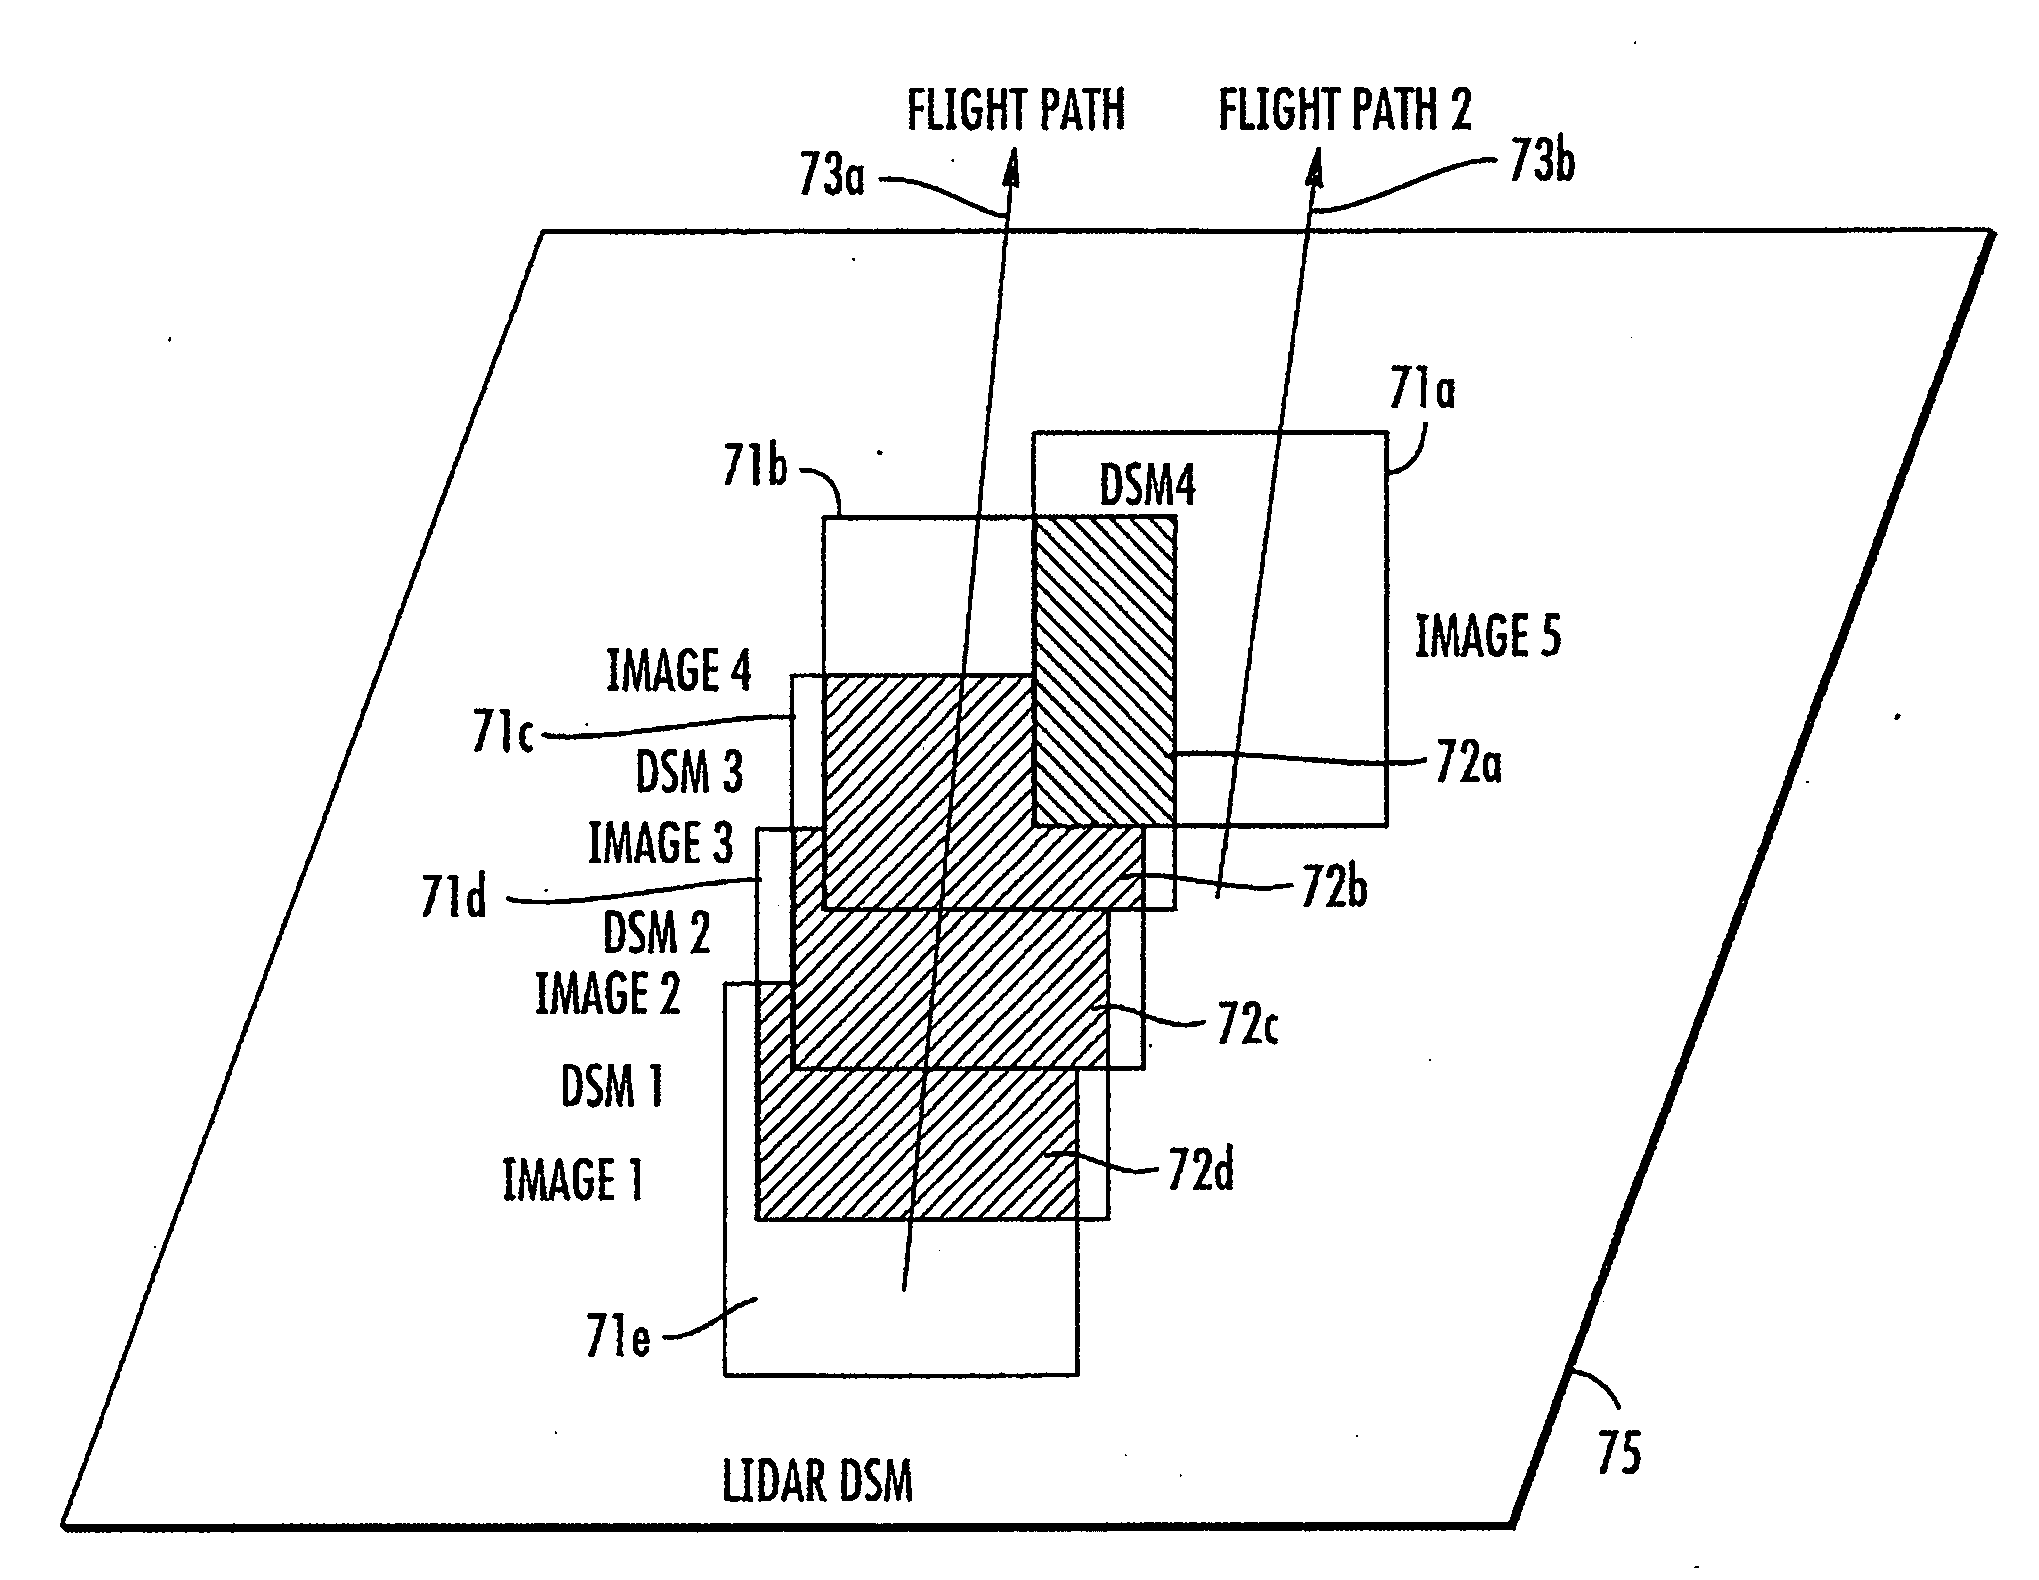 Geospatial modeling system for images and related methods